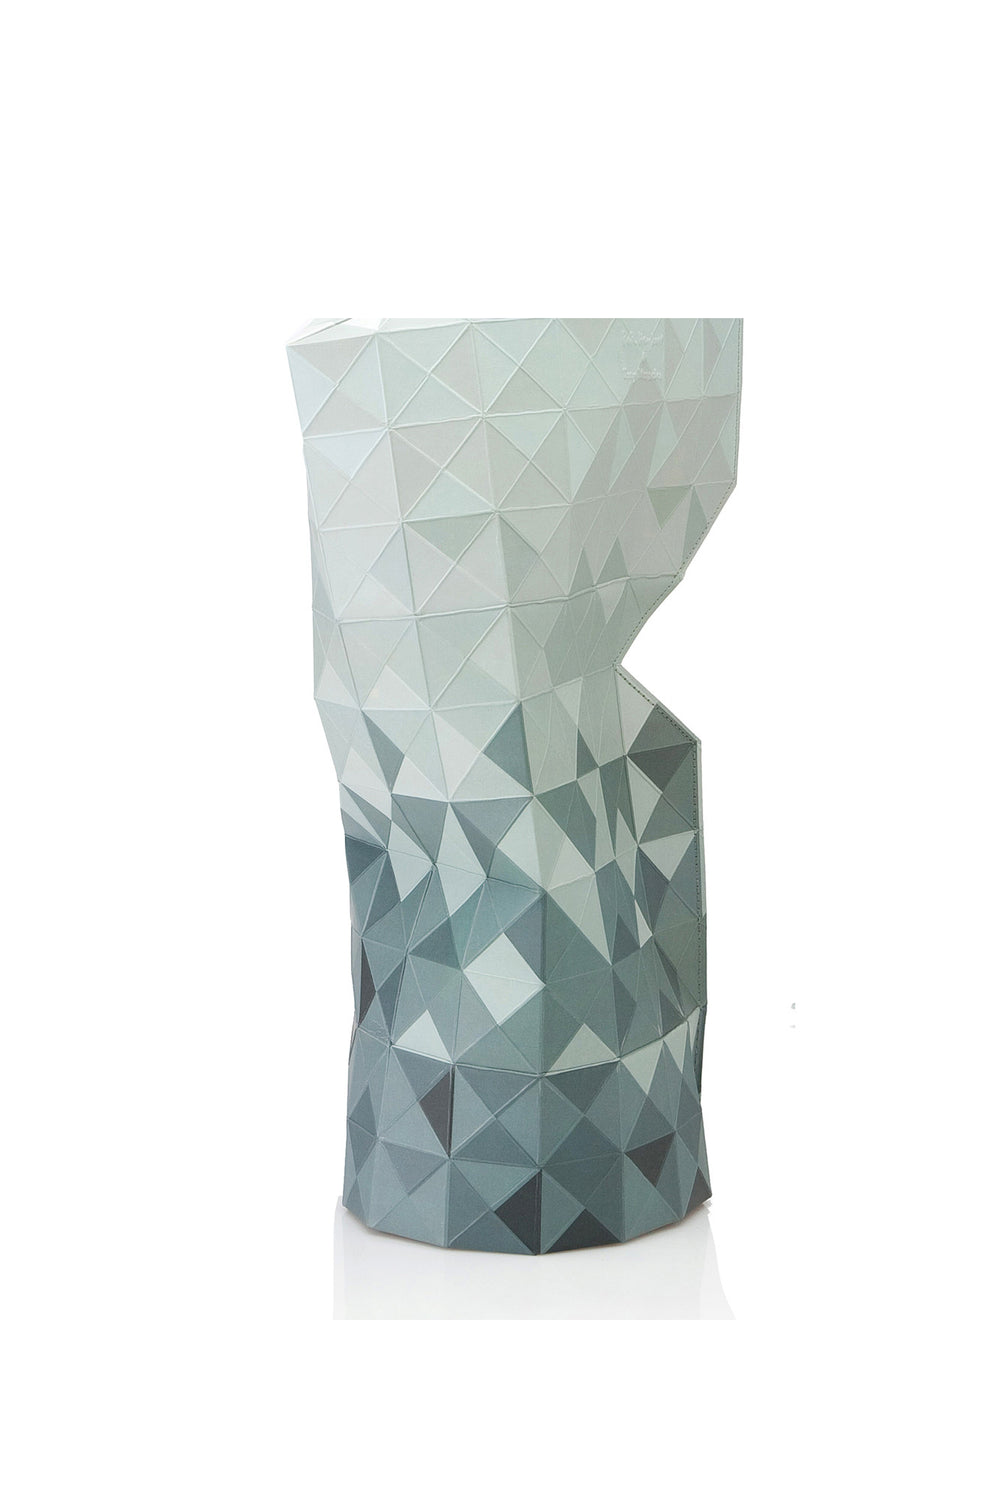 Large Grey Gradients Vase Cover, Vase, Tiny Miracles - 3LittlePicks